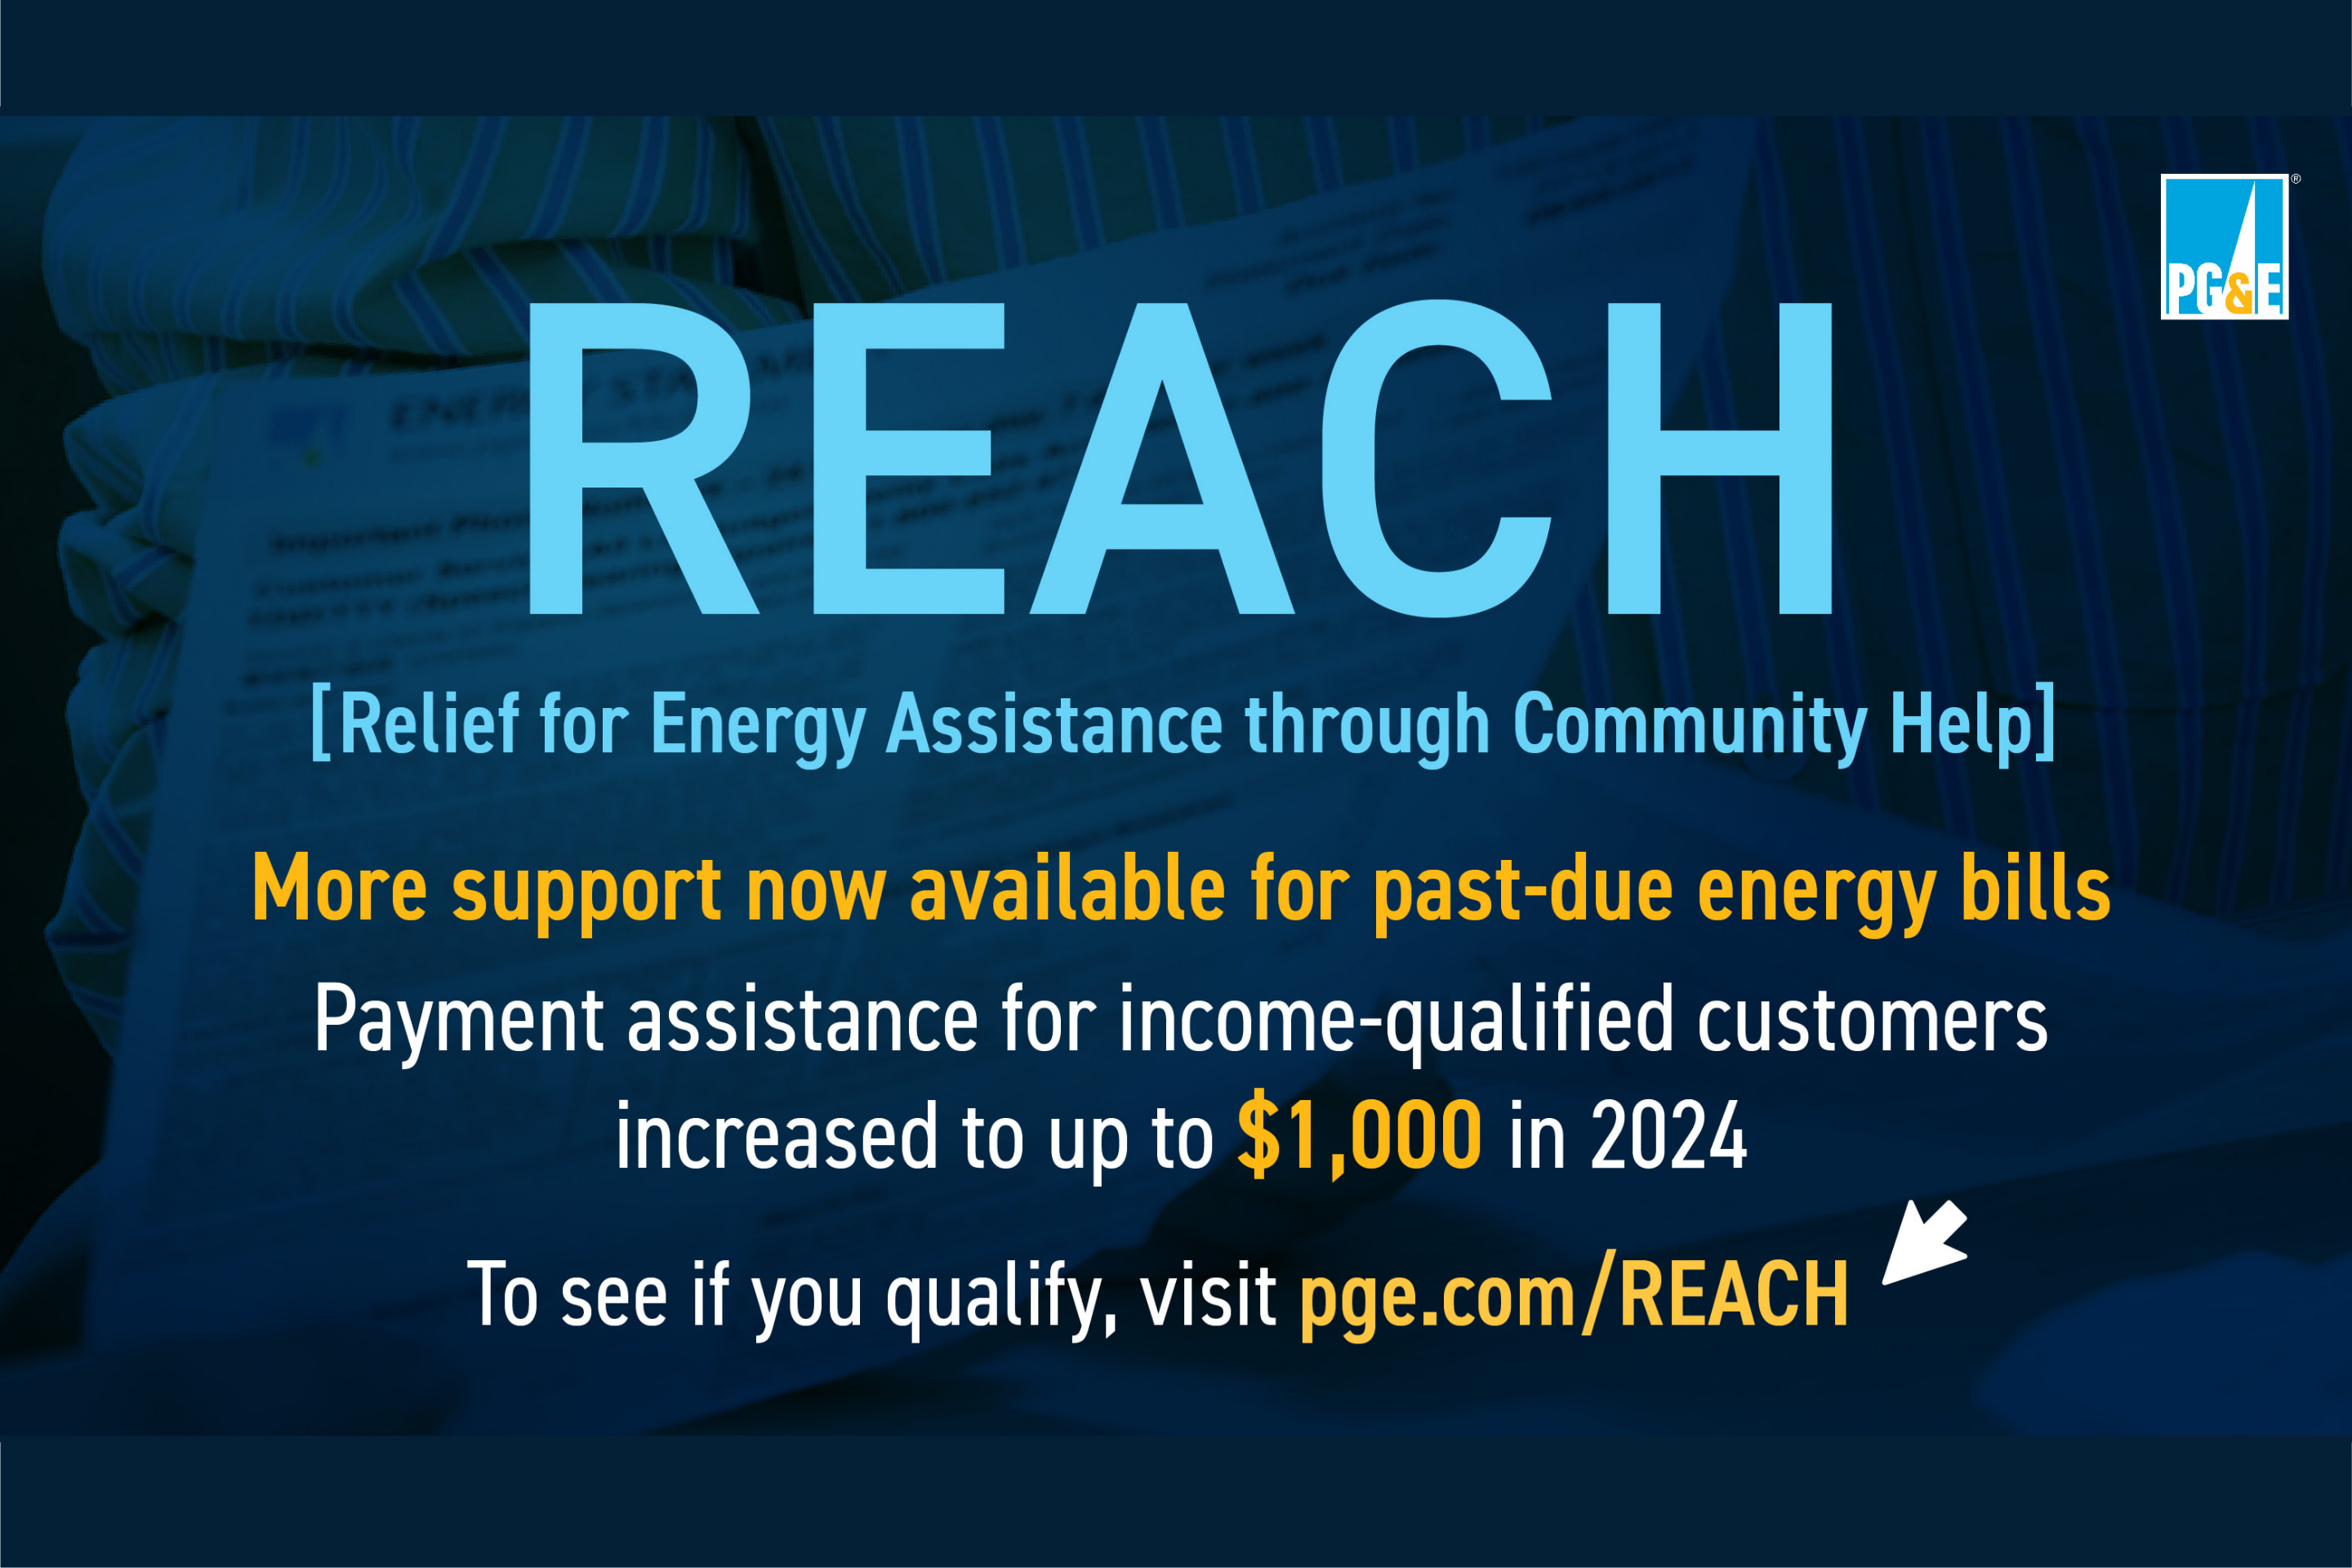 PG&E Contributes $55 Million to Expand REACH Program, Providing More Support to Income-Eligible Customers on Energy Bills 